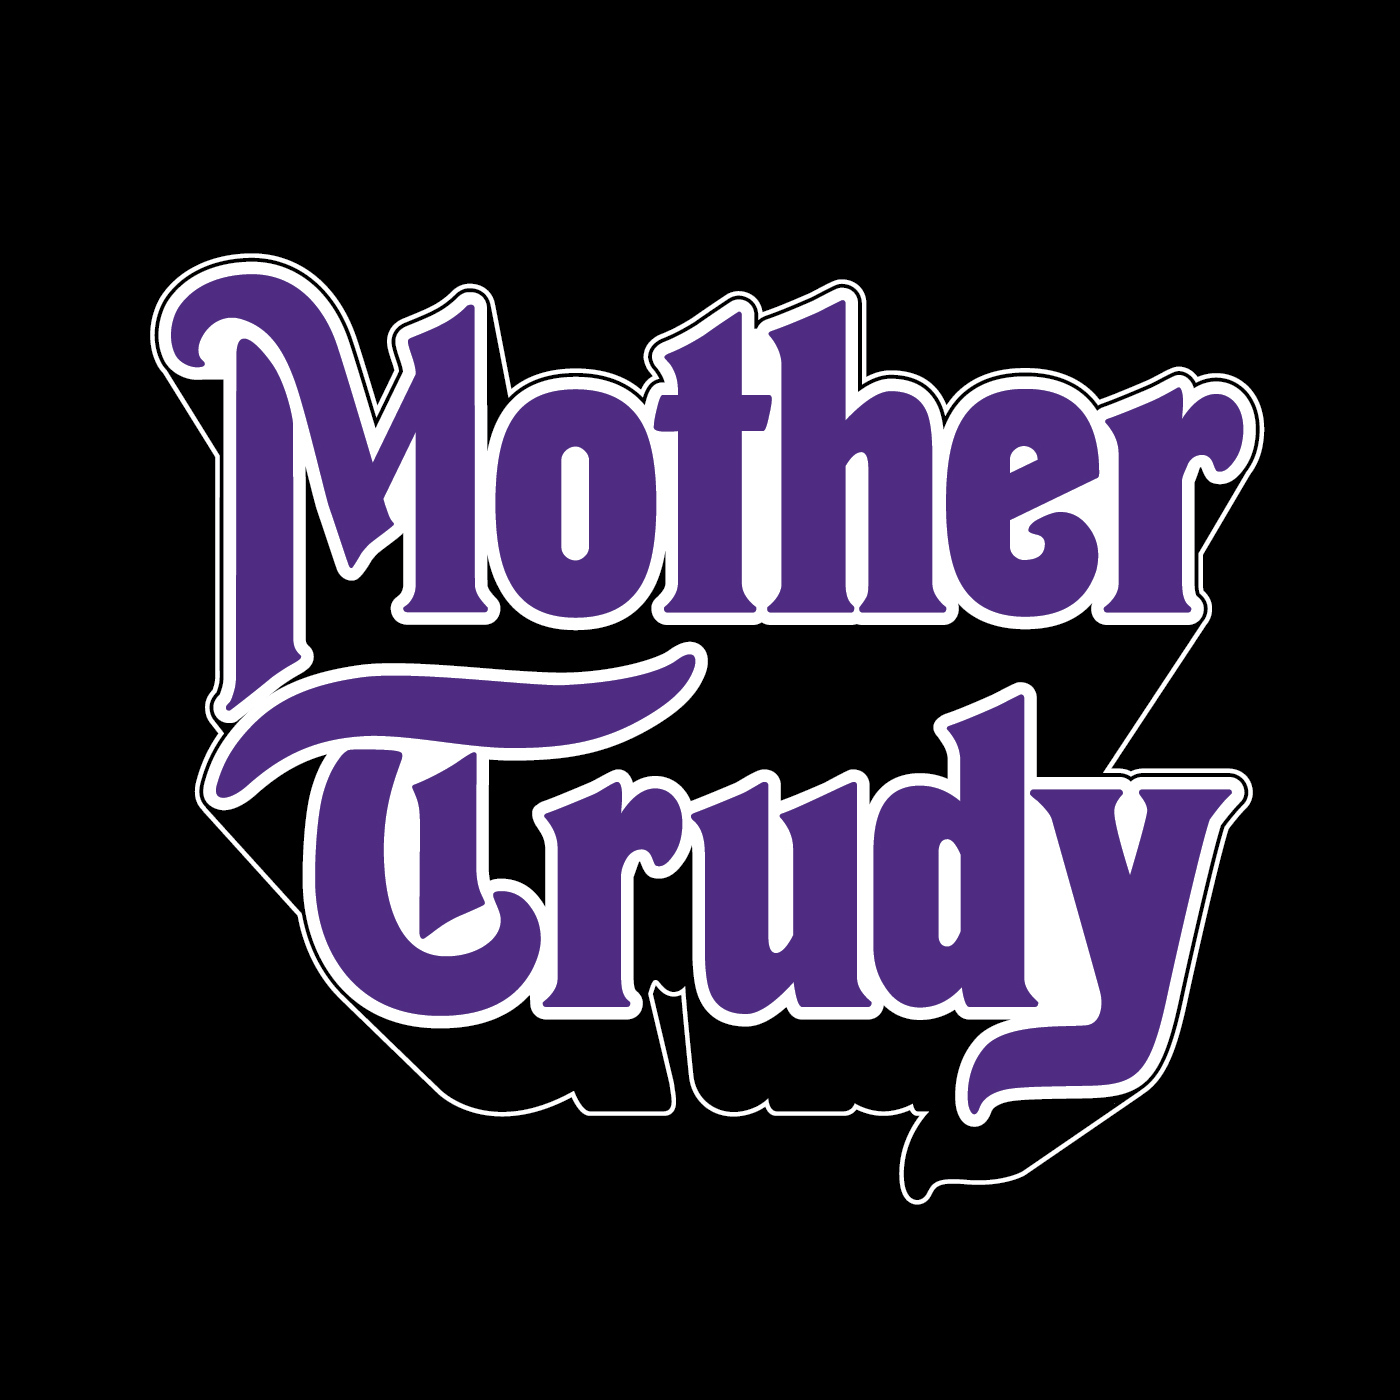 MOTHER TRUDY (NOR) – Mother Trudy